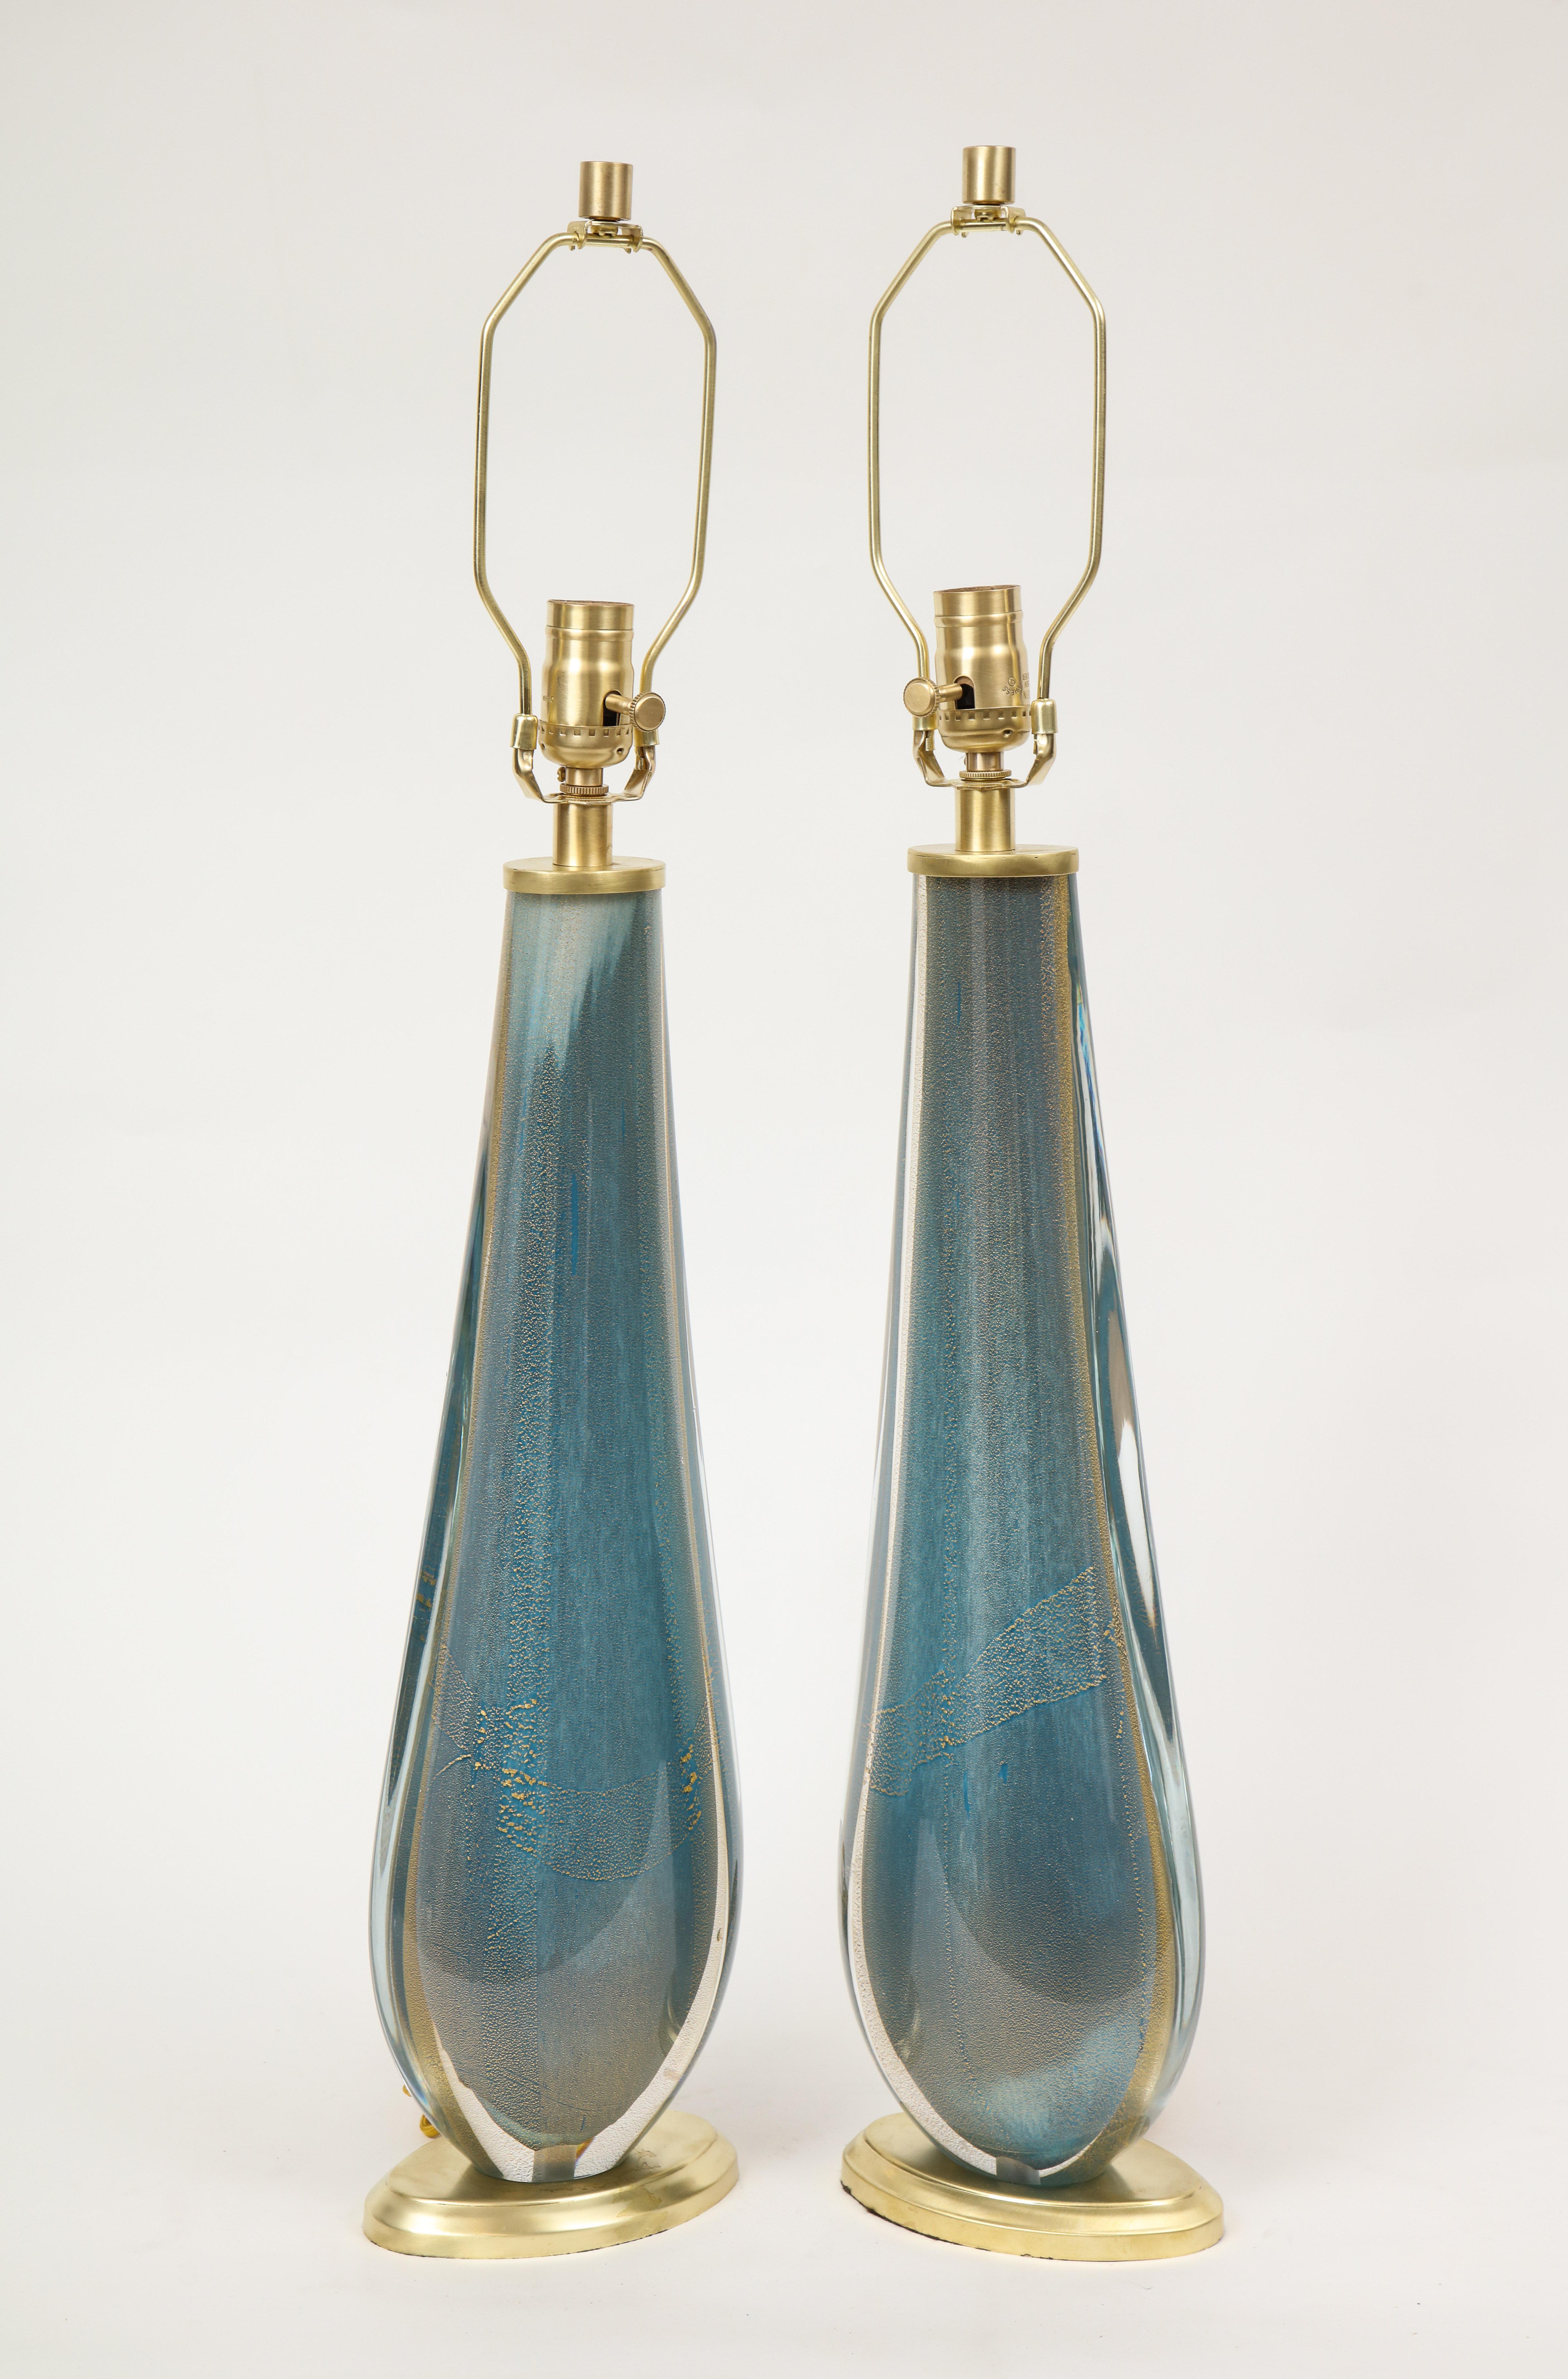 Pair of modernist French blue teardrop shaped Murano glass lamps with 22 karat gold overlay resting on oval satin brass platform bases. Rewired for use in the USA.